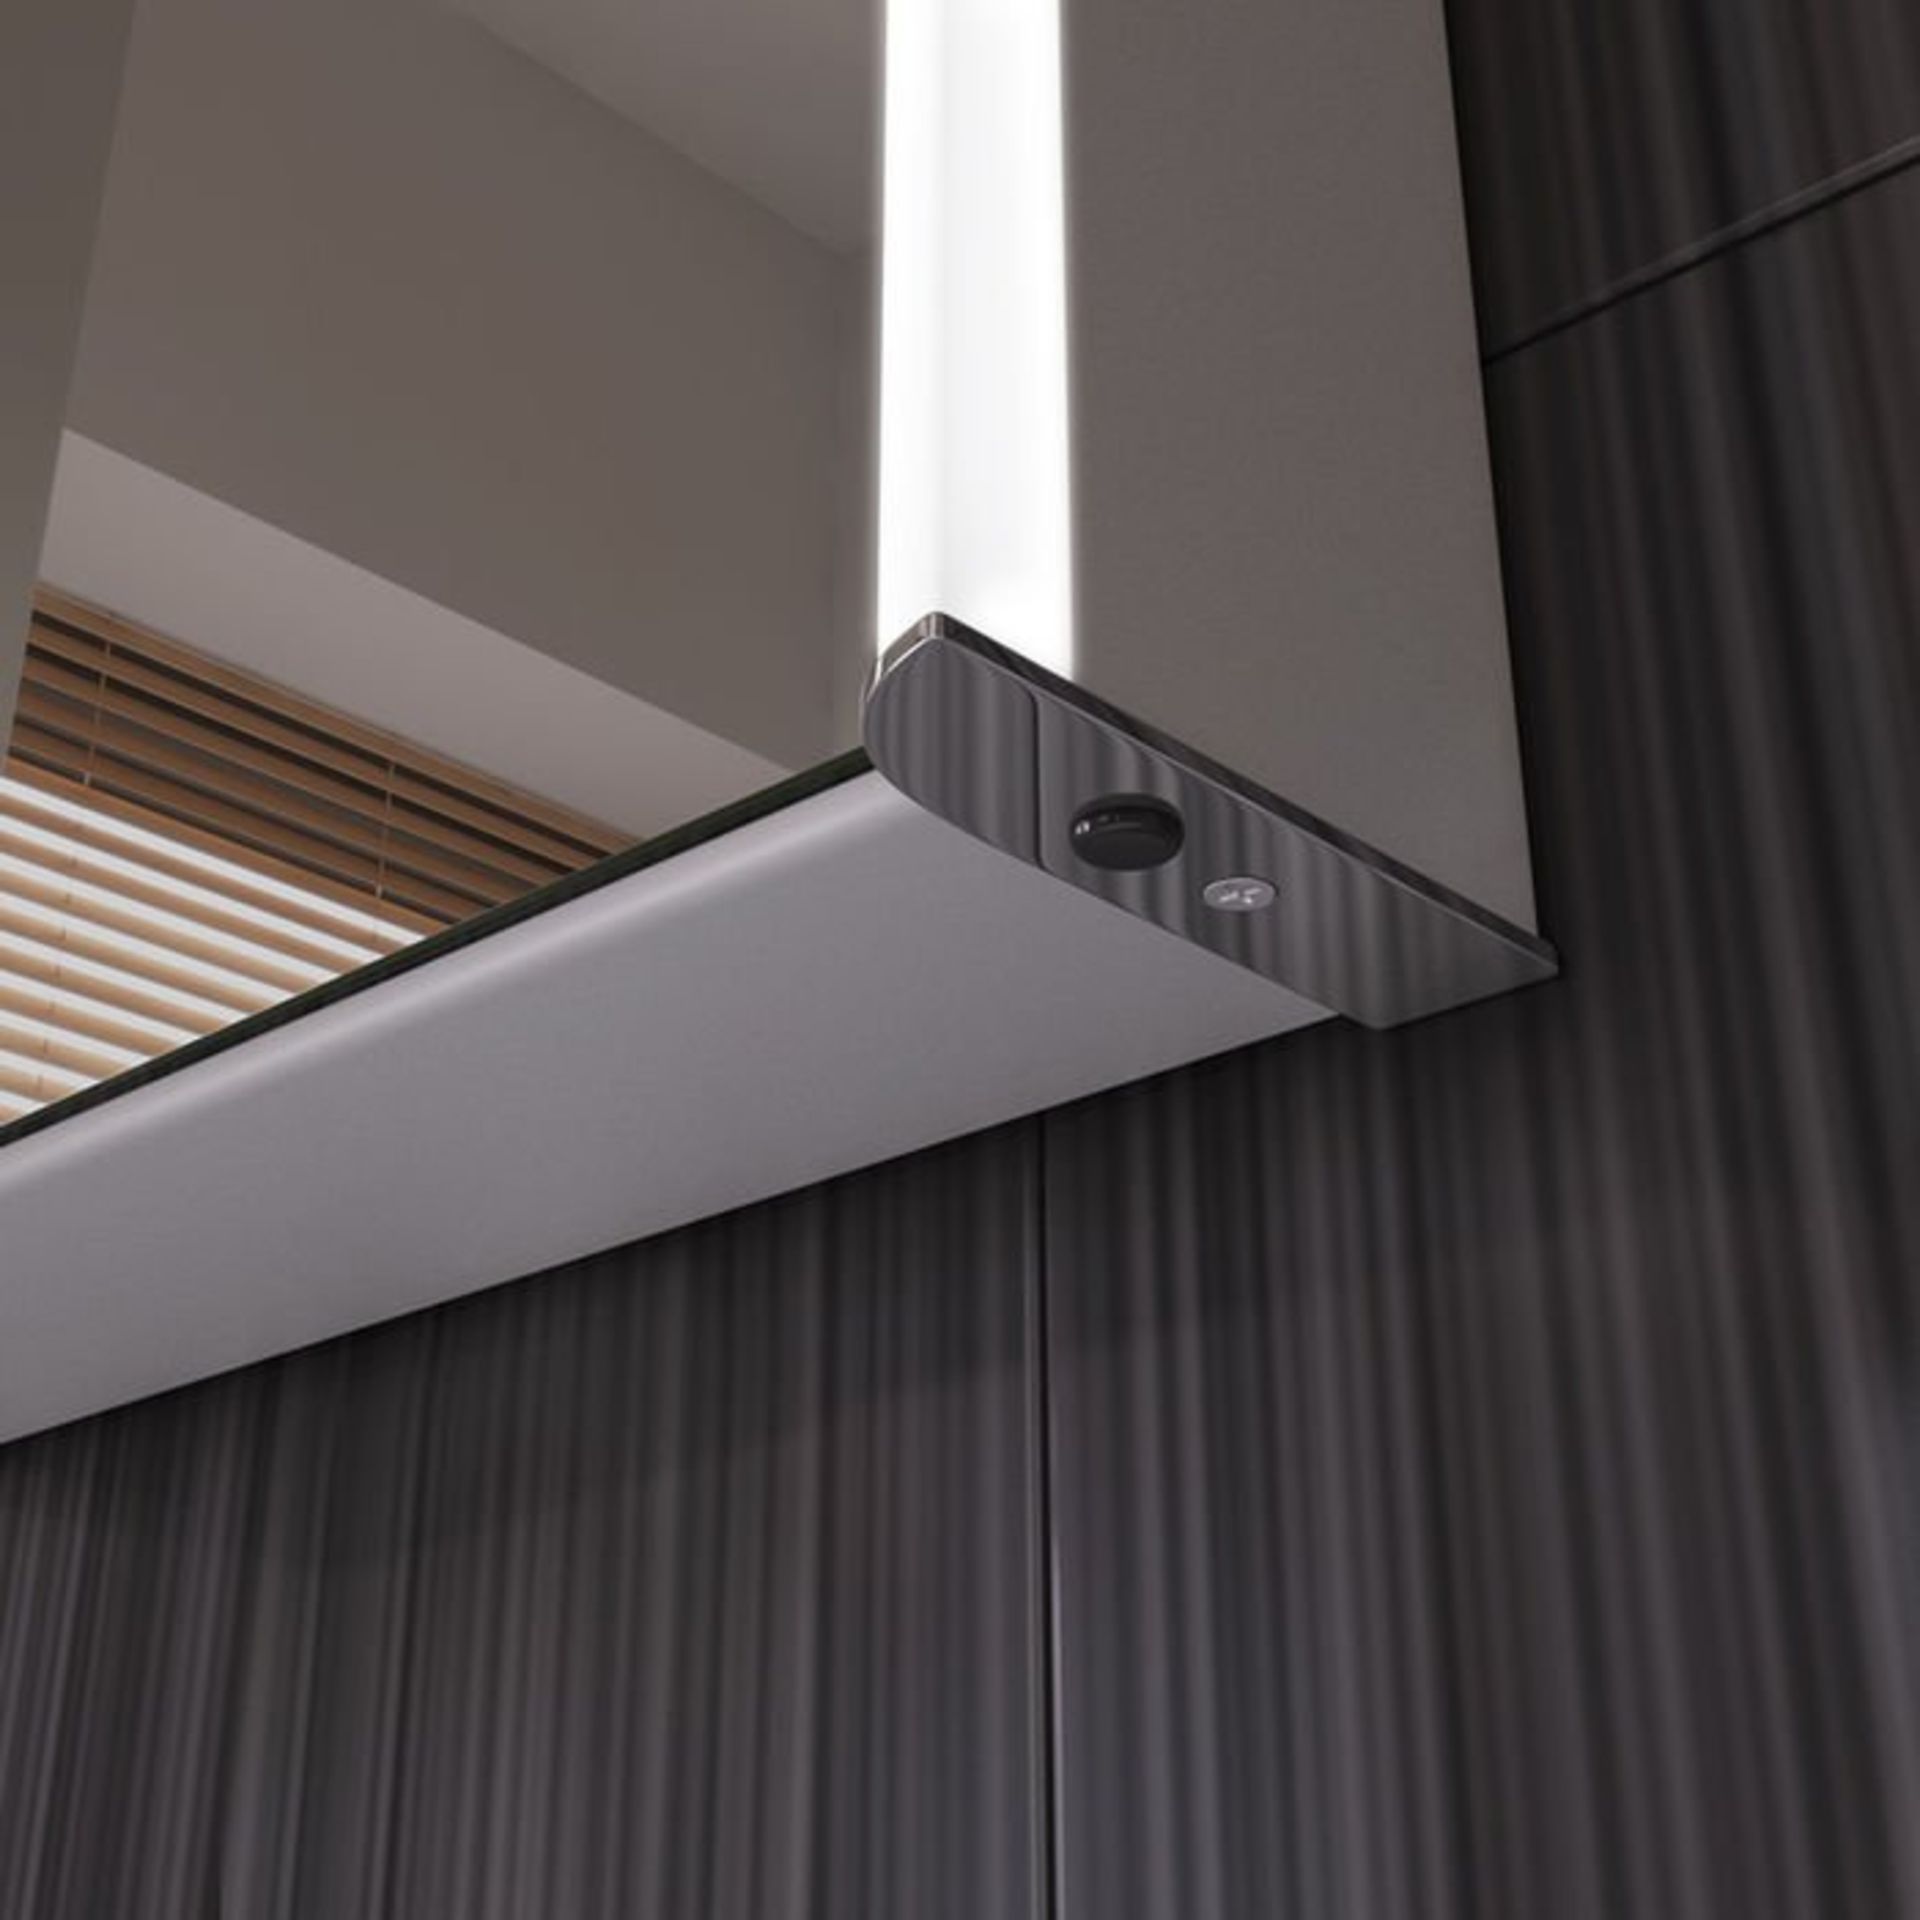 (H13) 450x600mm Bloom Illuminated LED Mirror Cabinet & Shaver Socket RRP £399.99 Double Sided Mirror - Image 4 of 5